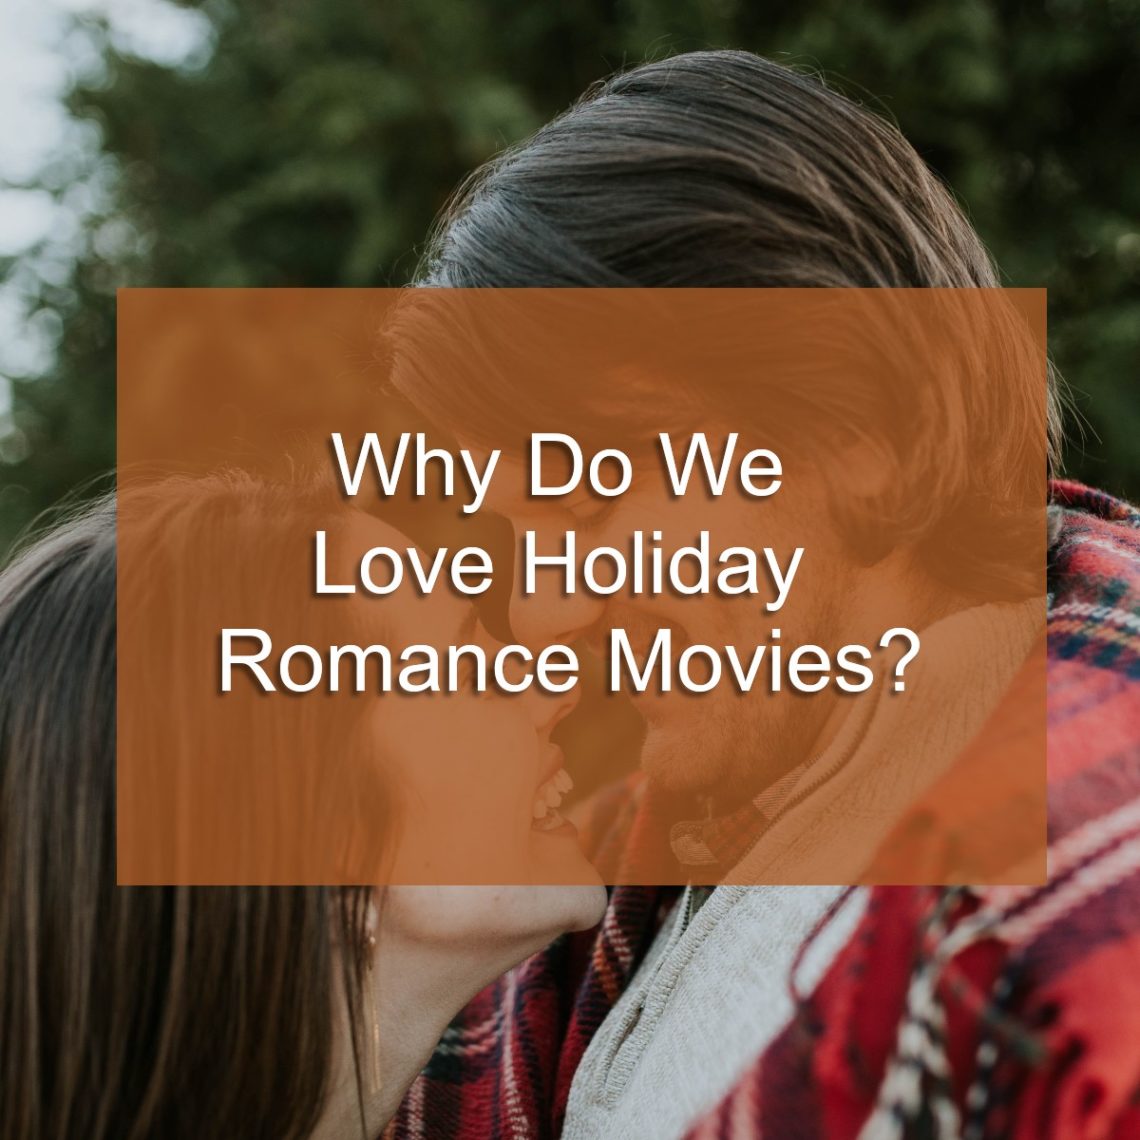 7 Reasons Why We Love Holiday Romance Movies Hygge Zone